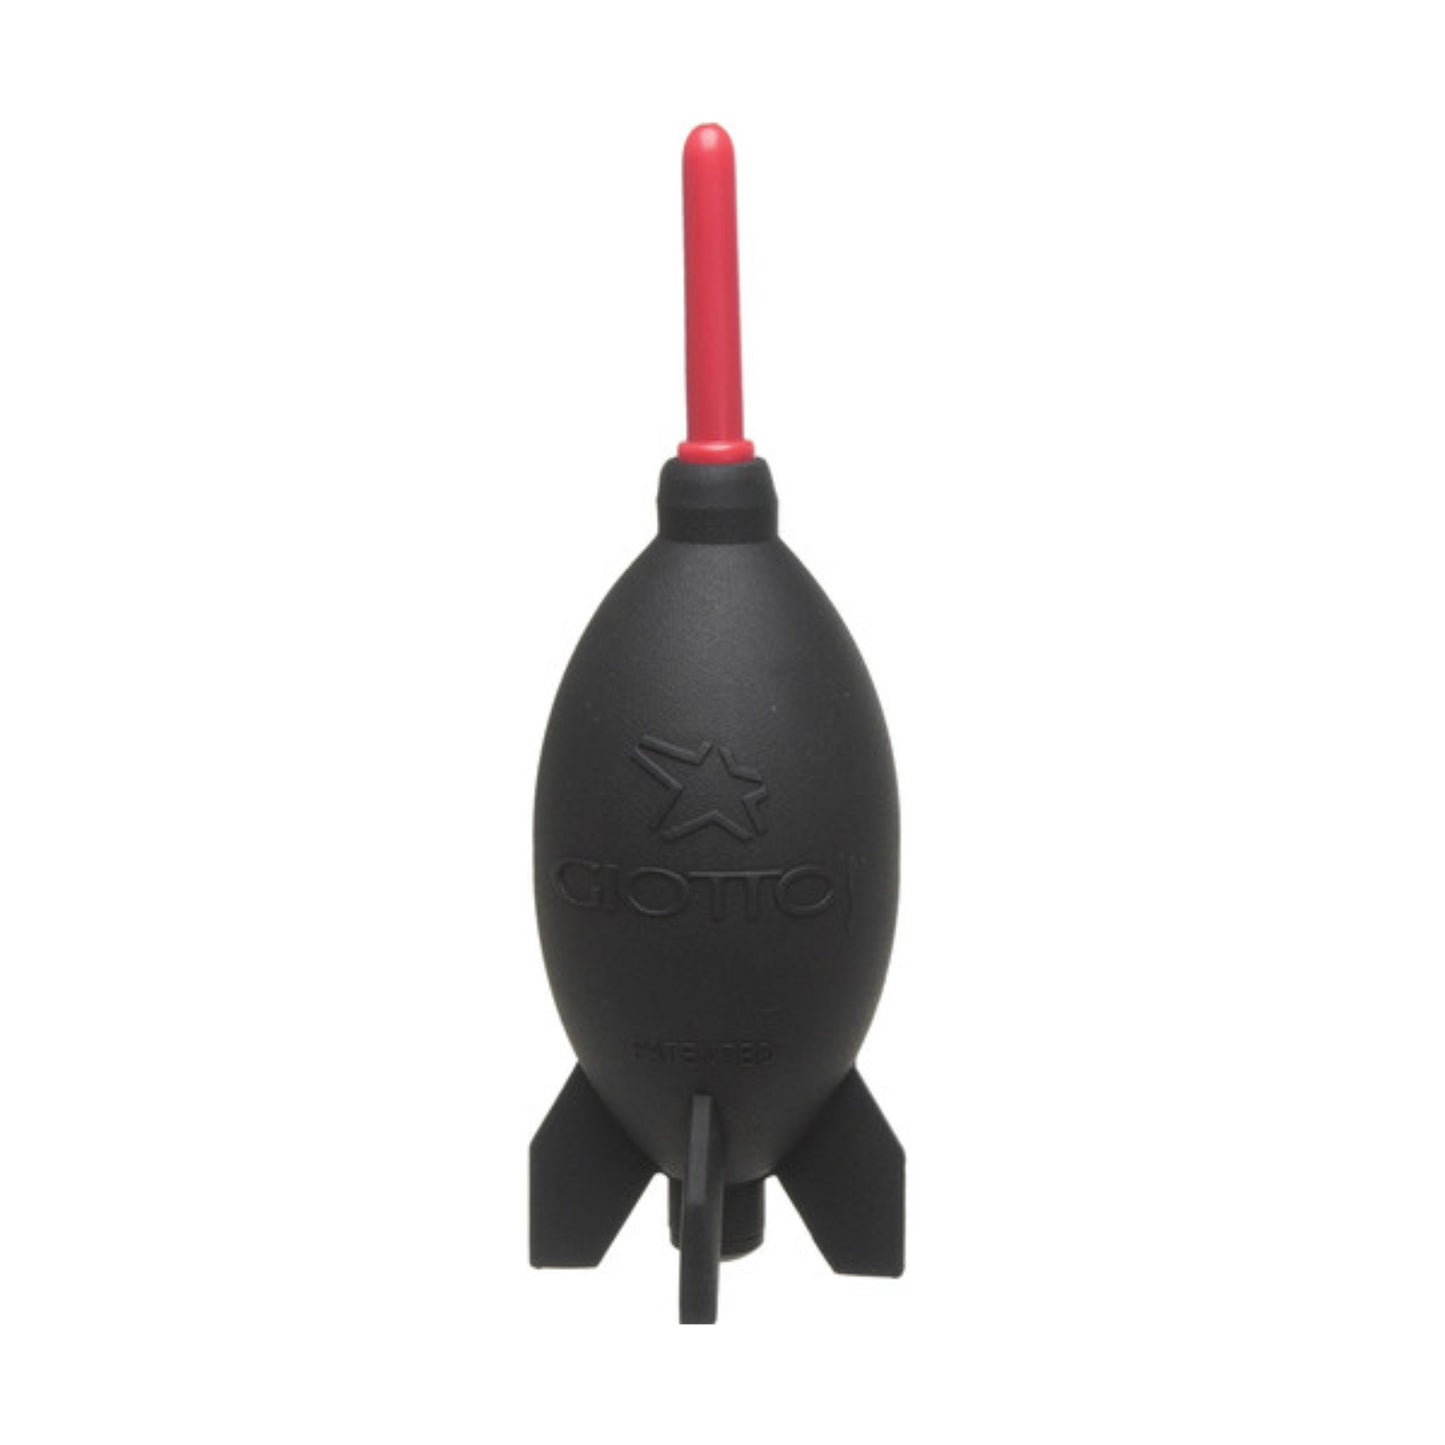 Buy Giottos Rocket Blower | Topic Store